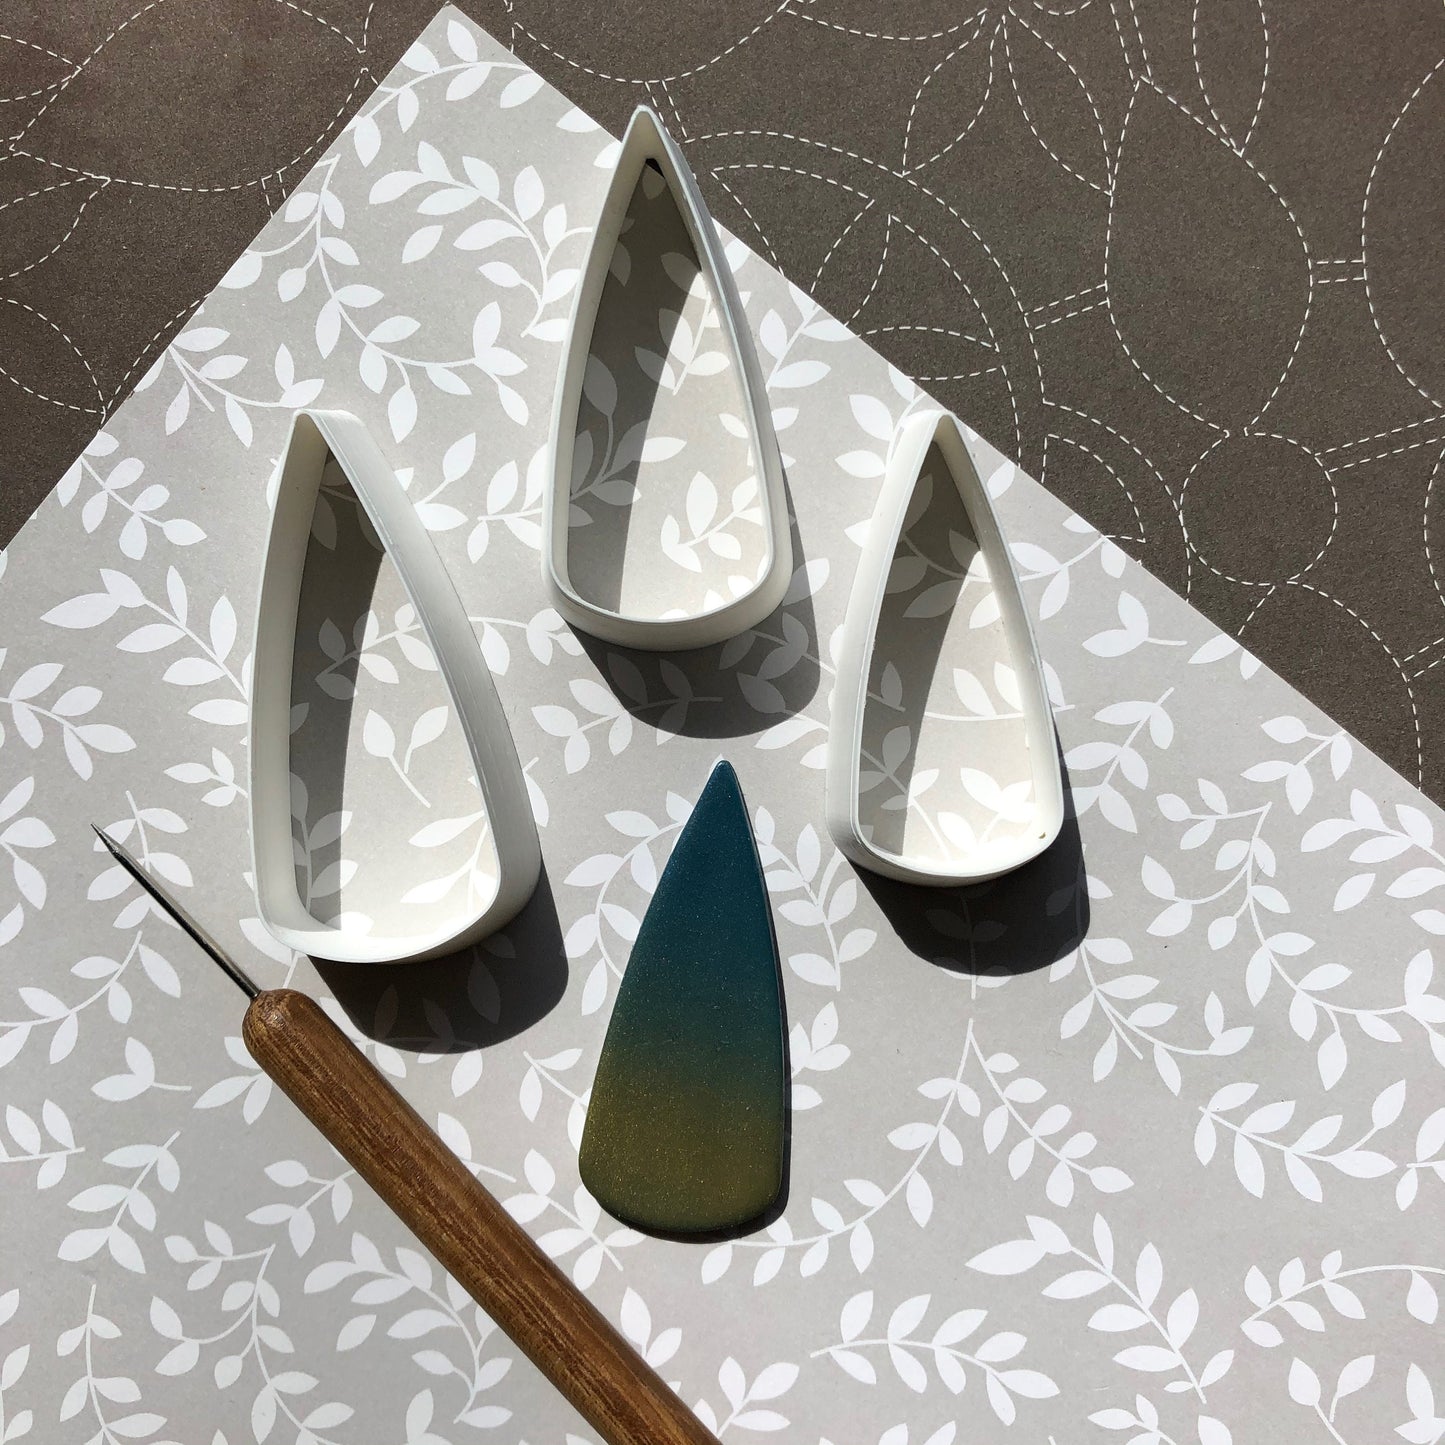 Dagger shape cutter set - made for use with polymer clay